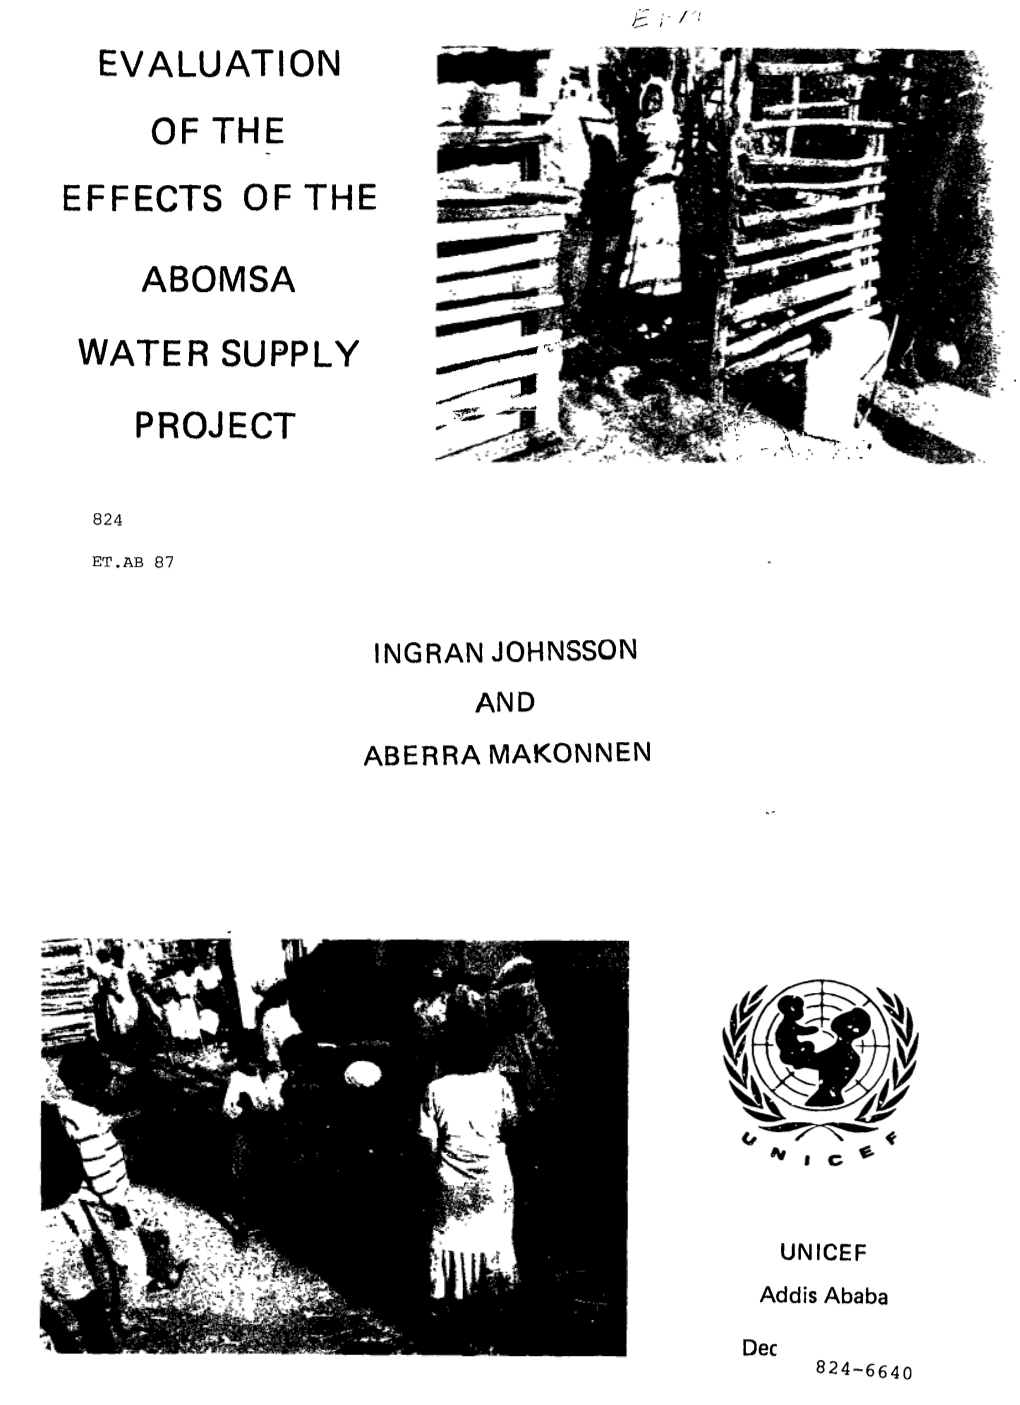 Evaluation of the Effects of the Abomsa Water Supply